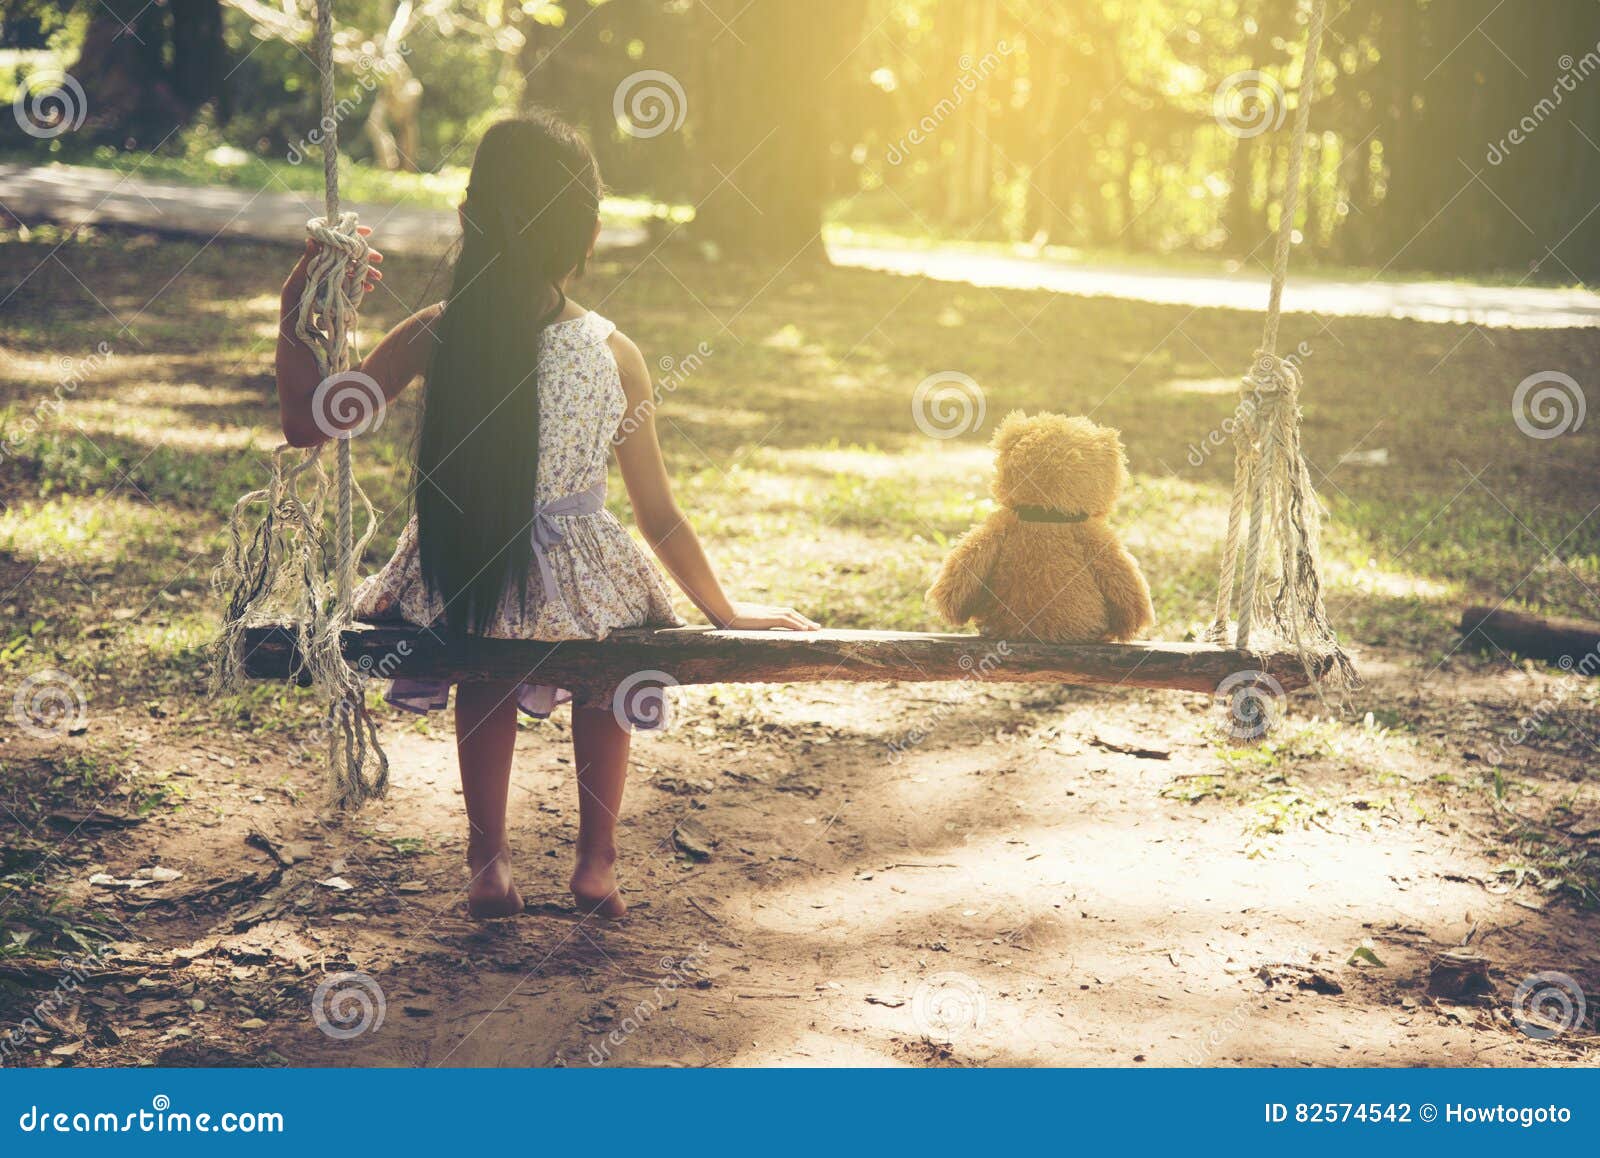 Sad Girl Feeling Alone in the Park Concept Stock Photo - Image of ...